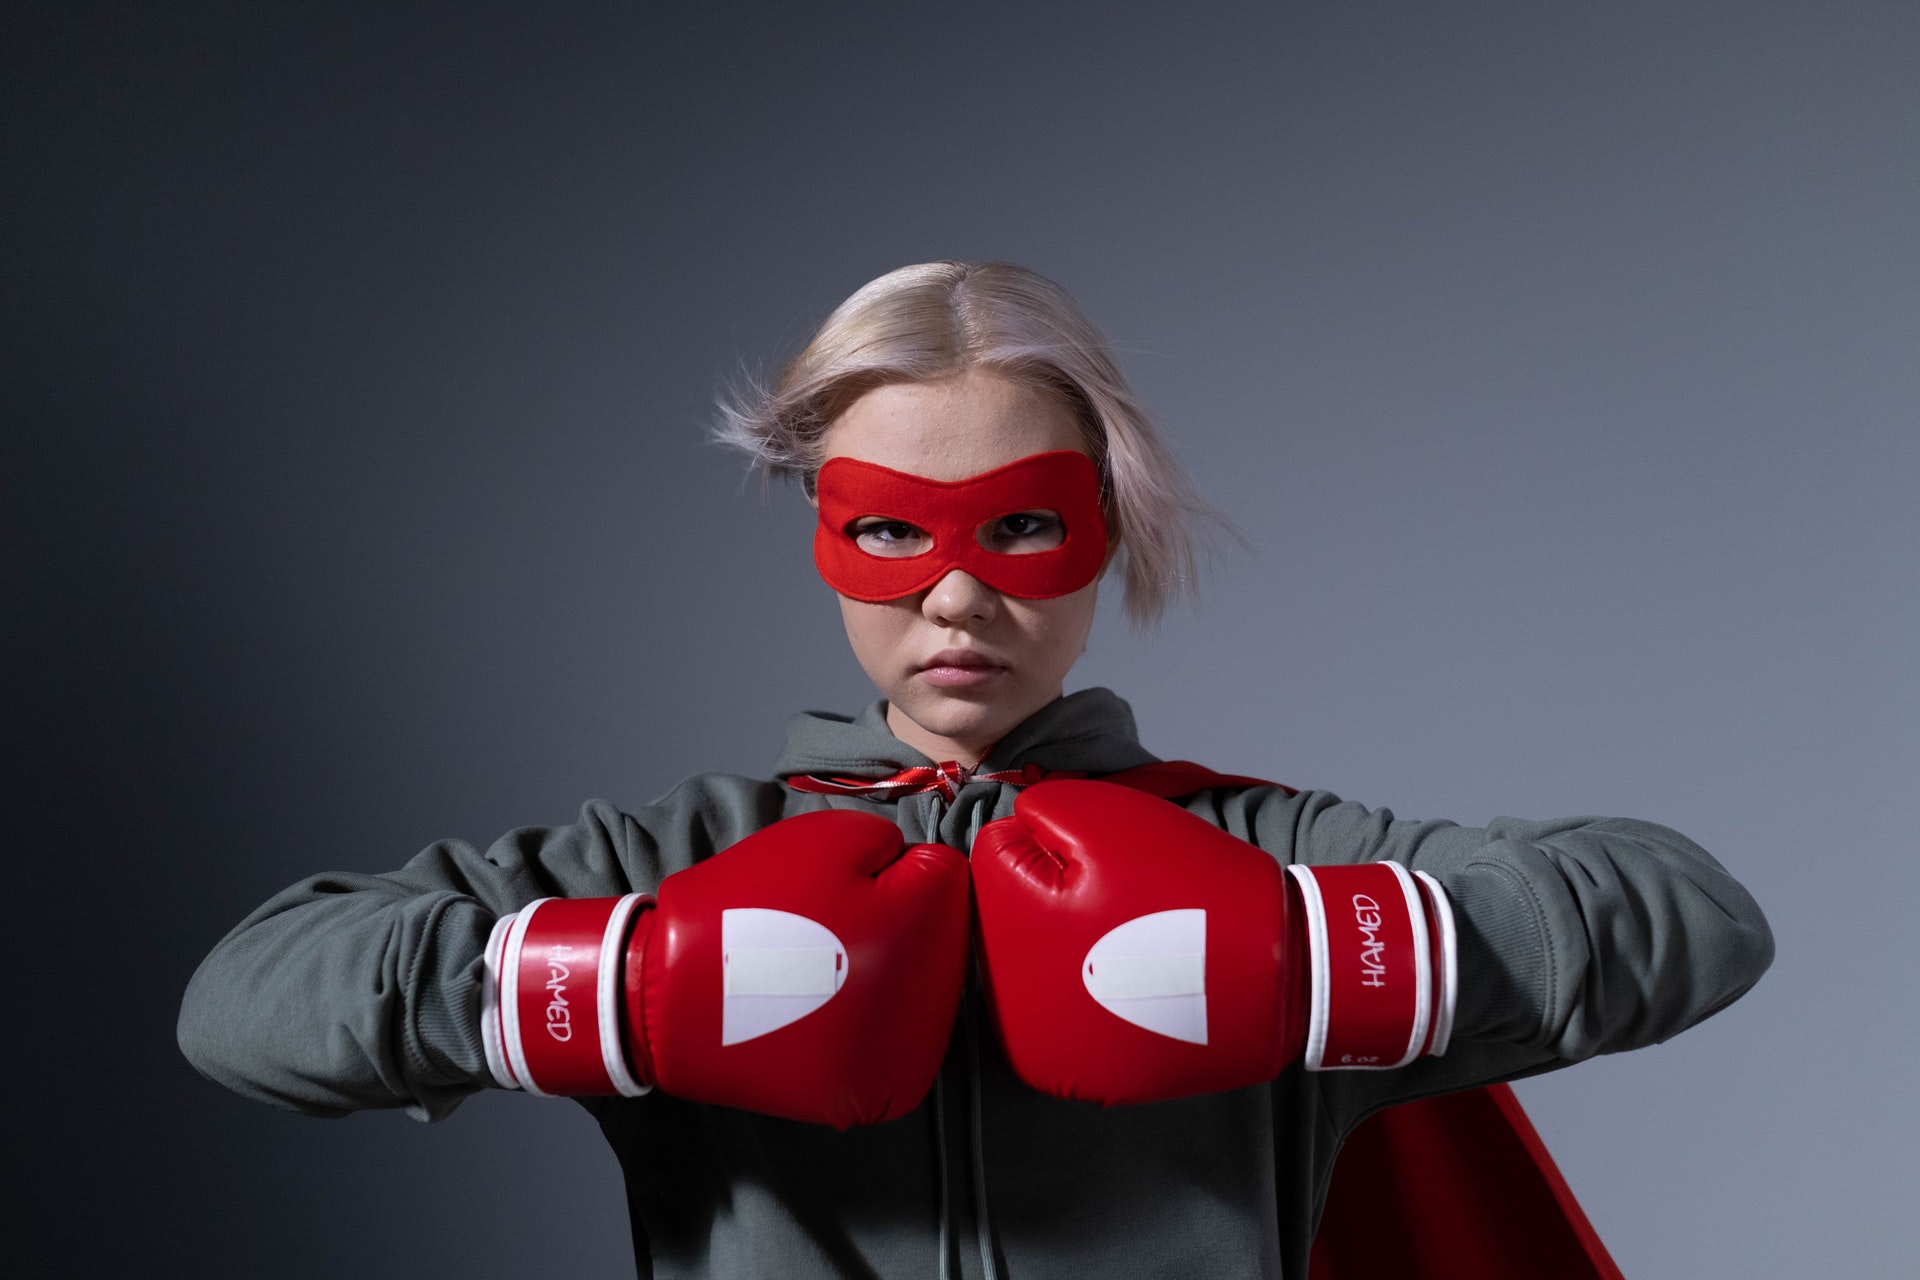 Product Management as a Superpower